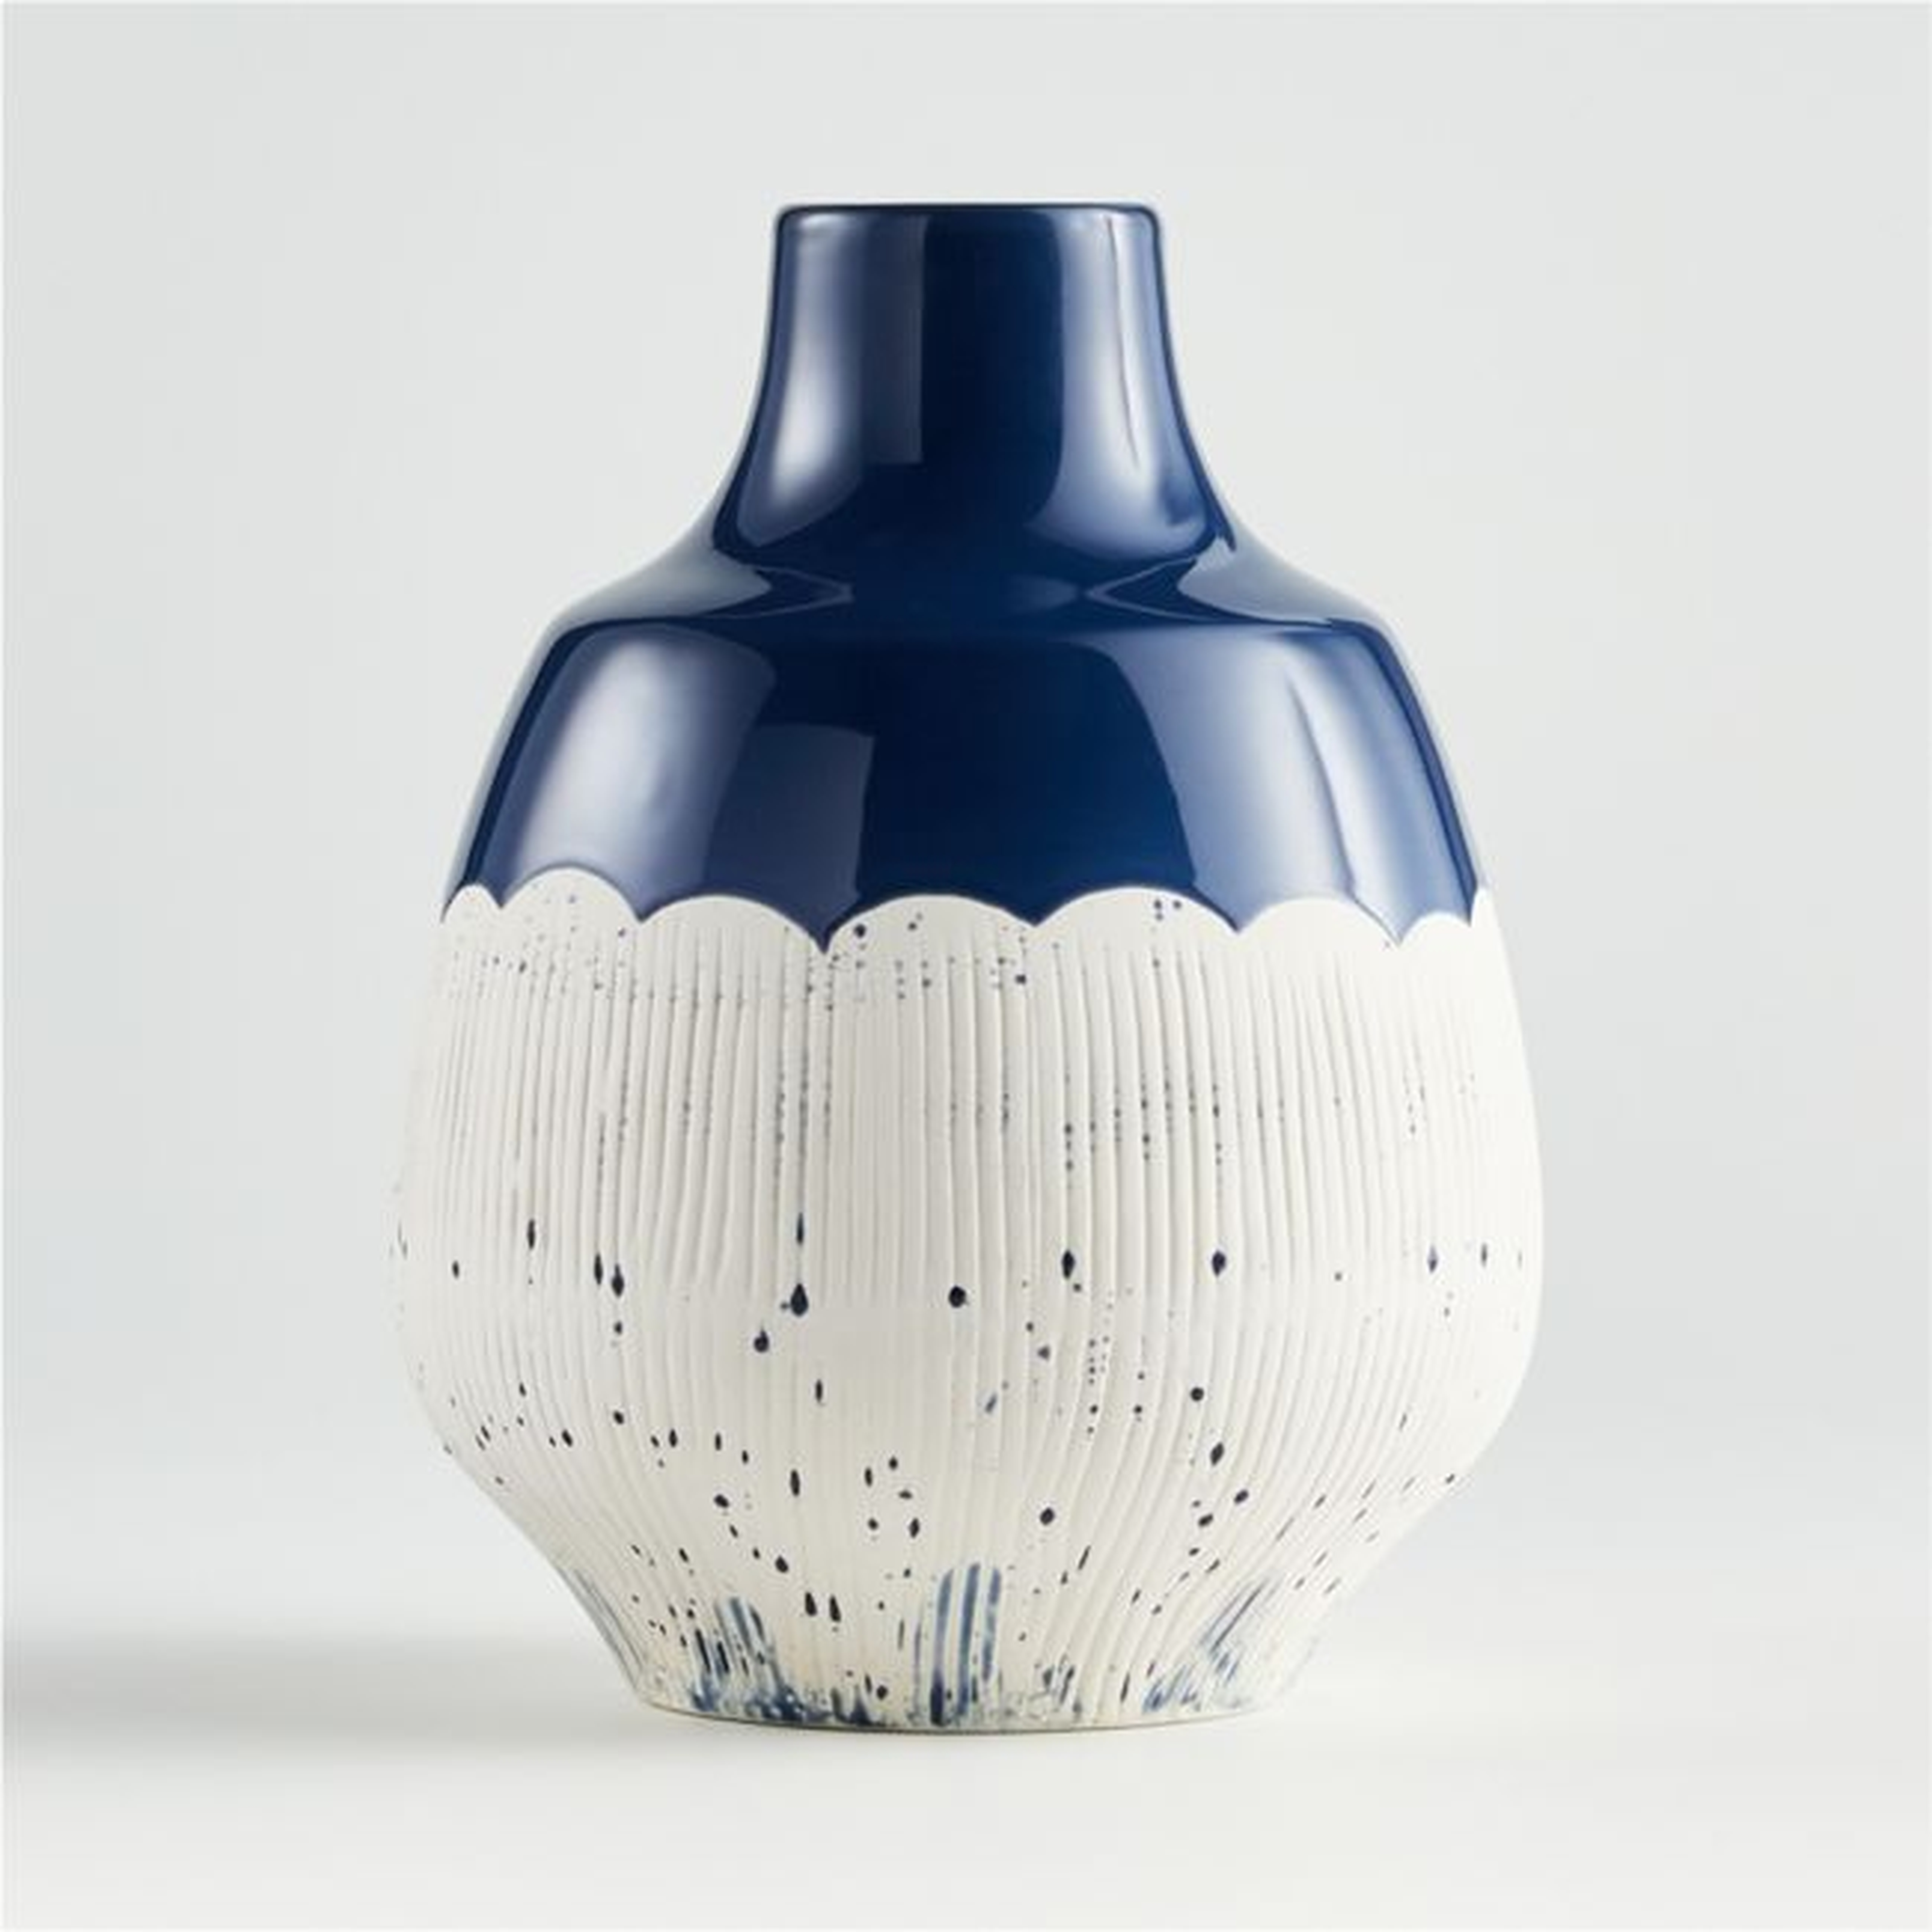 Nightfall Scalloped White and Blue Vase - Crate and Barrel